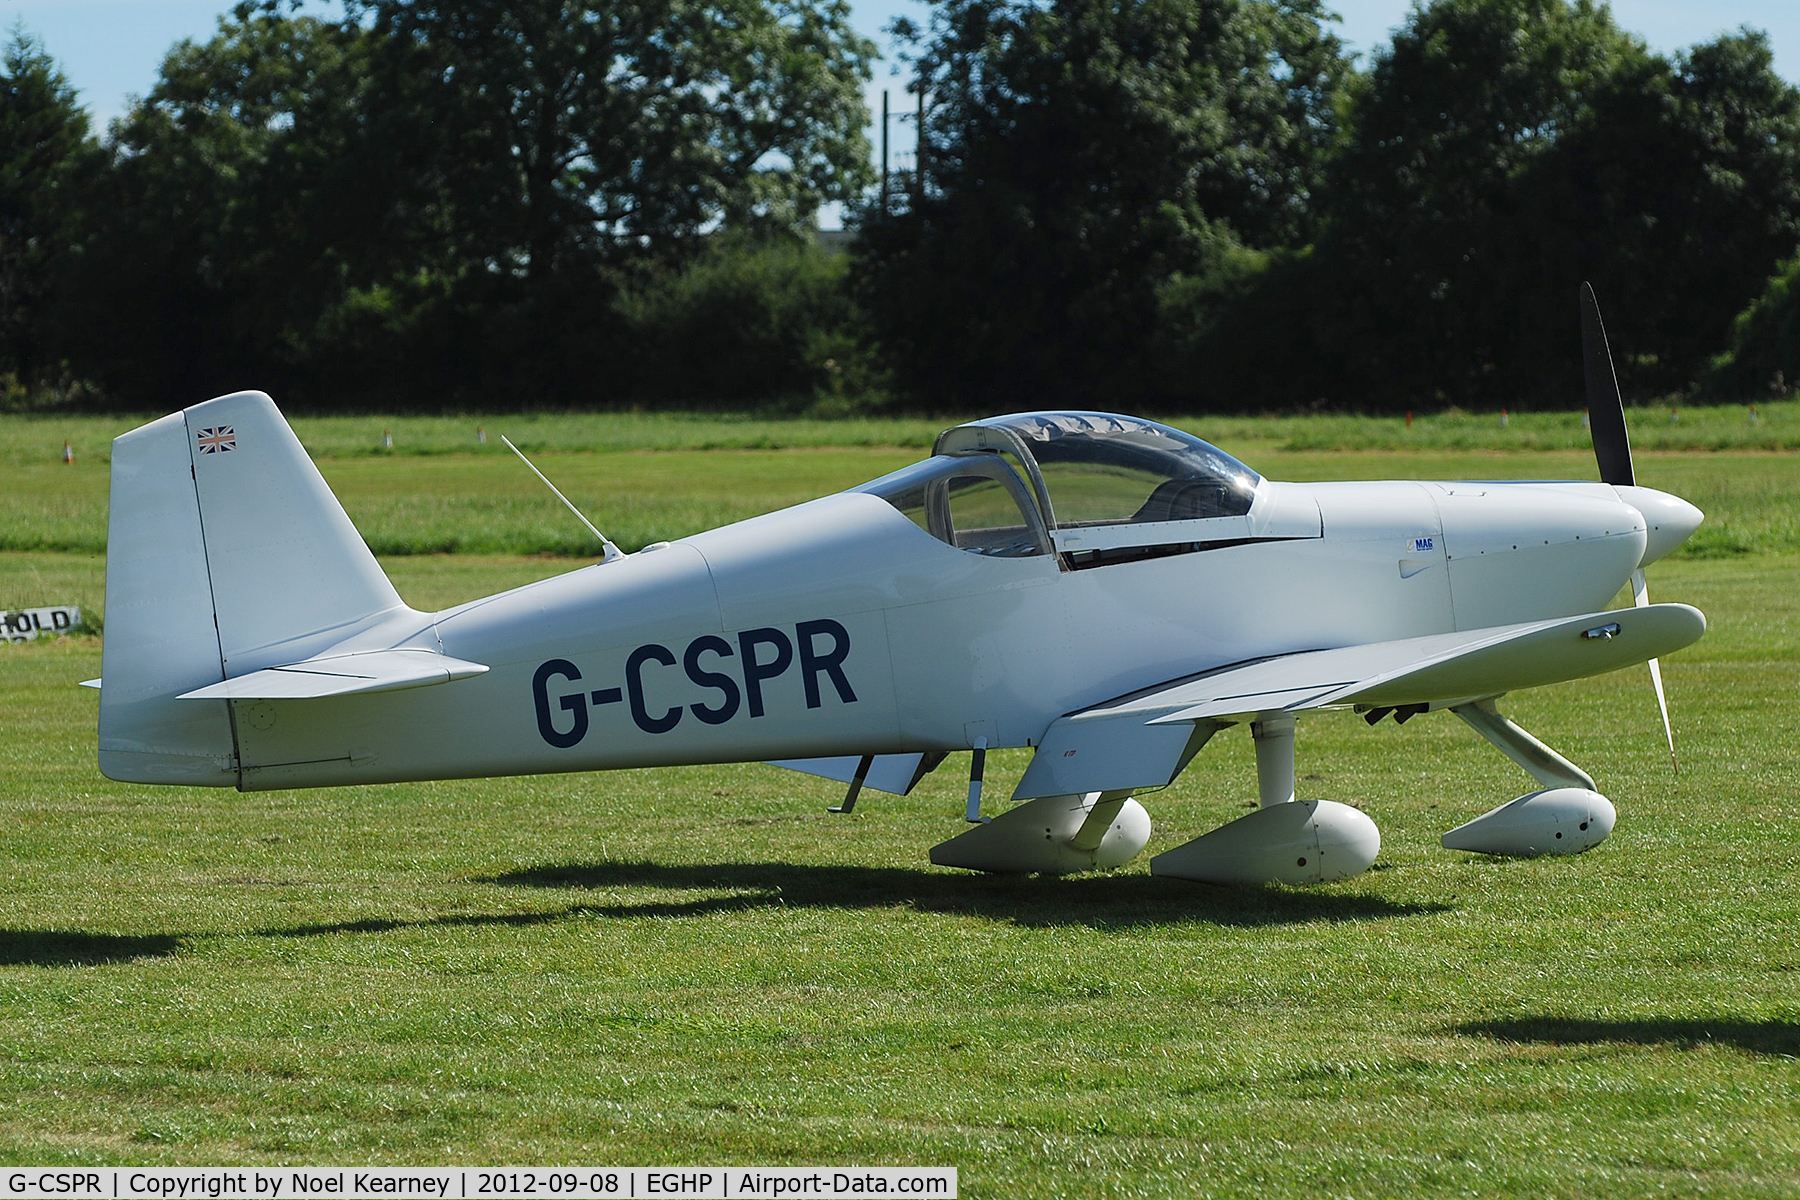 G-CSPR, 2000 Vans RV-6A C/N 25584, Photographed at the Popham Vintage Fly-in Sept '12.